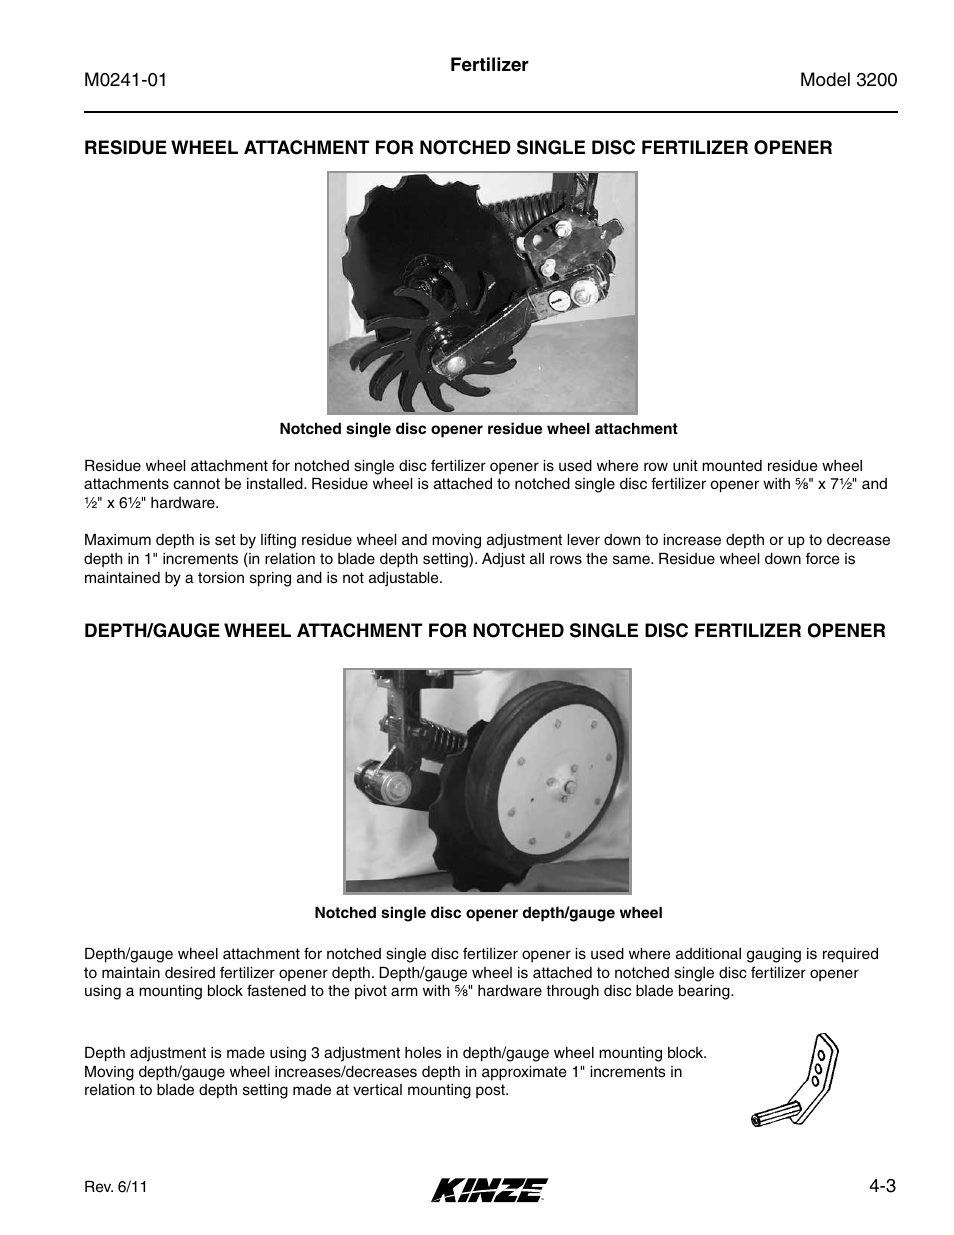 Kinze 3200 Wing-Fold Planter Rev. 7/14 User Manual | Page 61 / 192